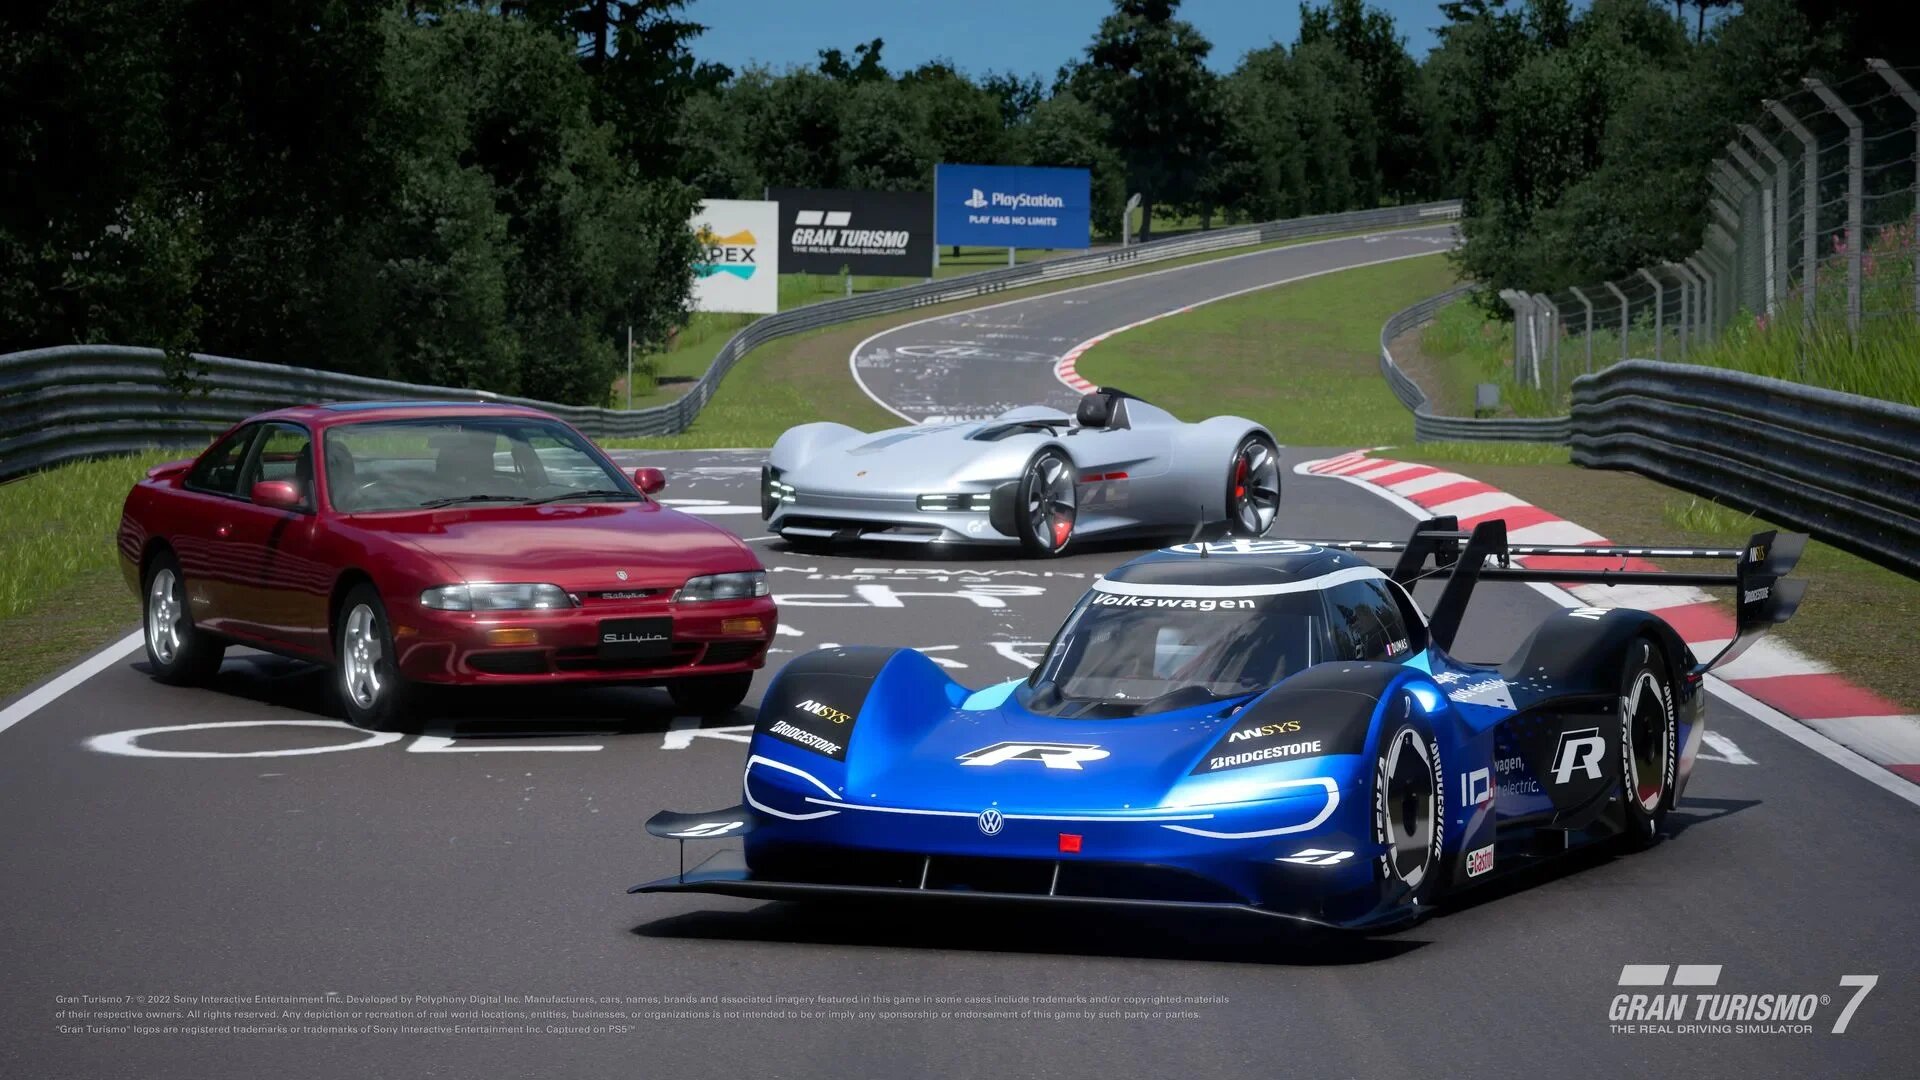 Gran Turismo 7 Shows that Live Service Games Have a Long Way to Go